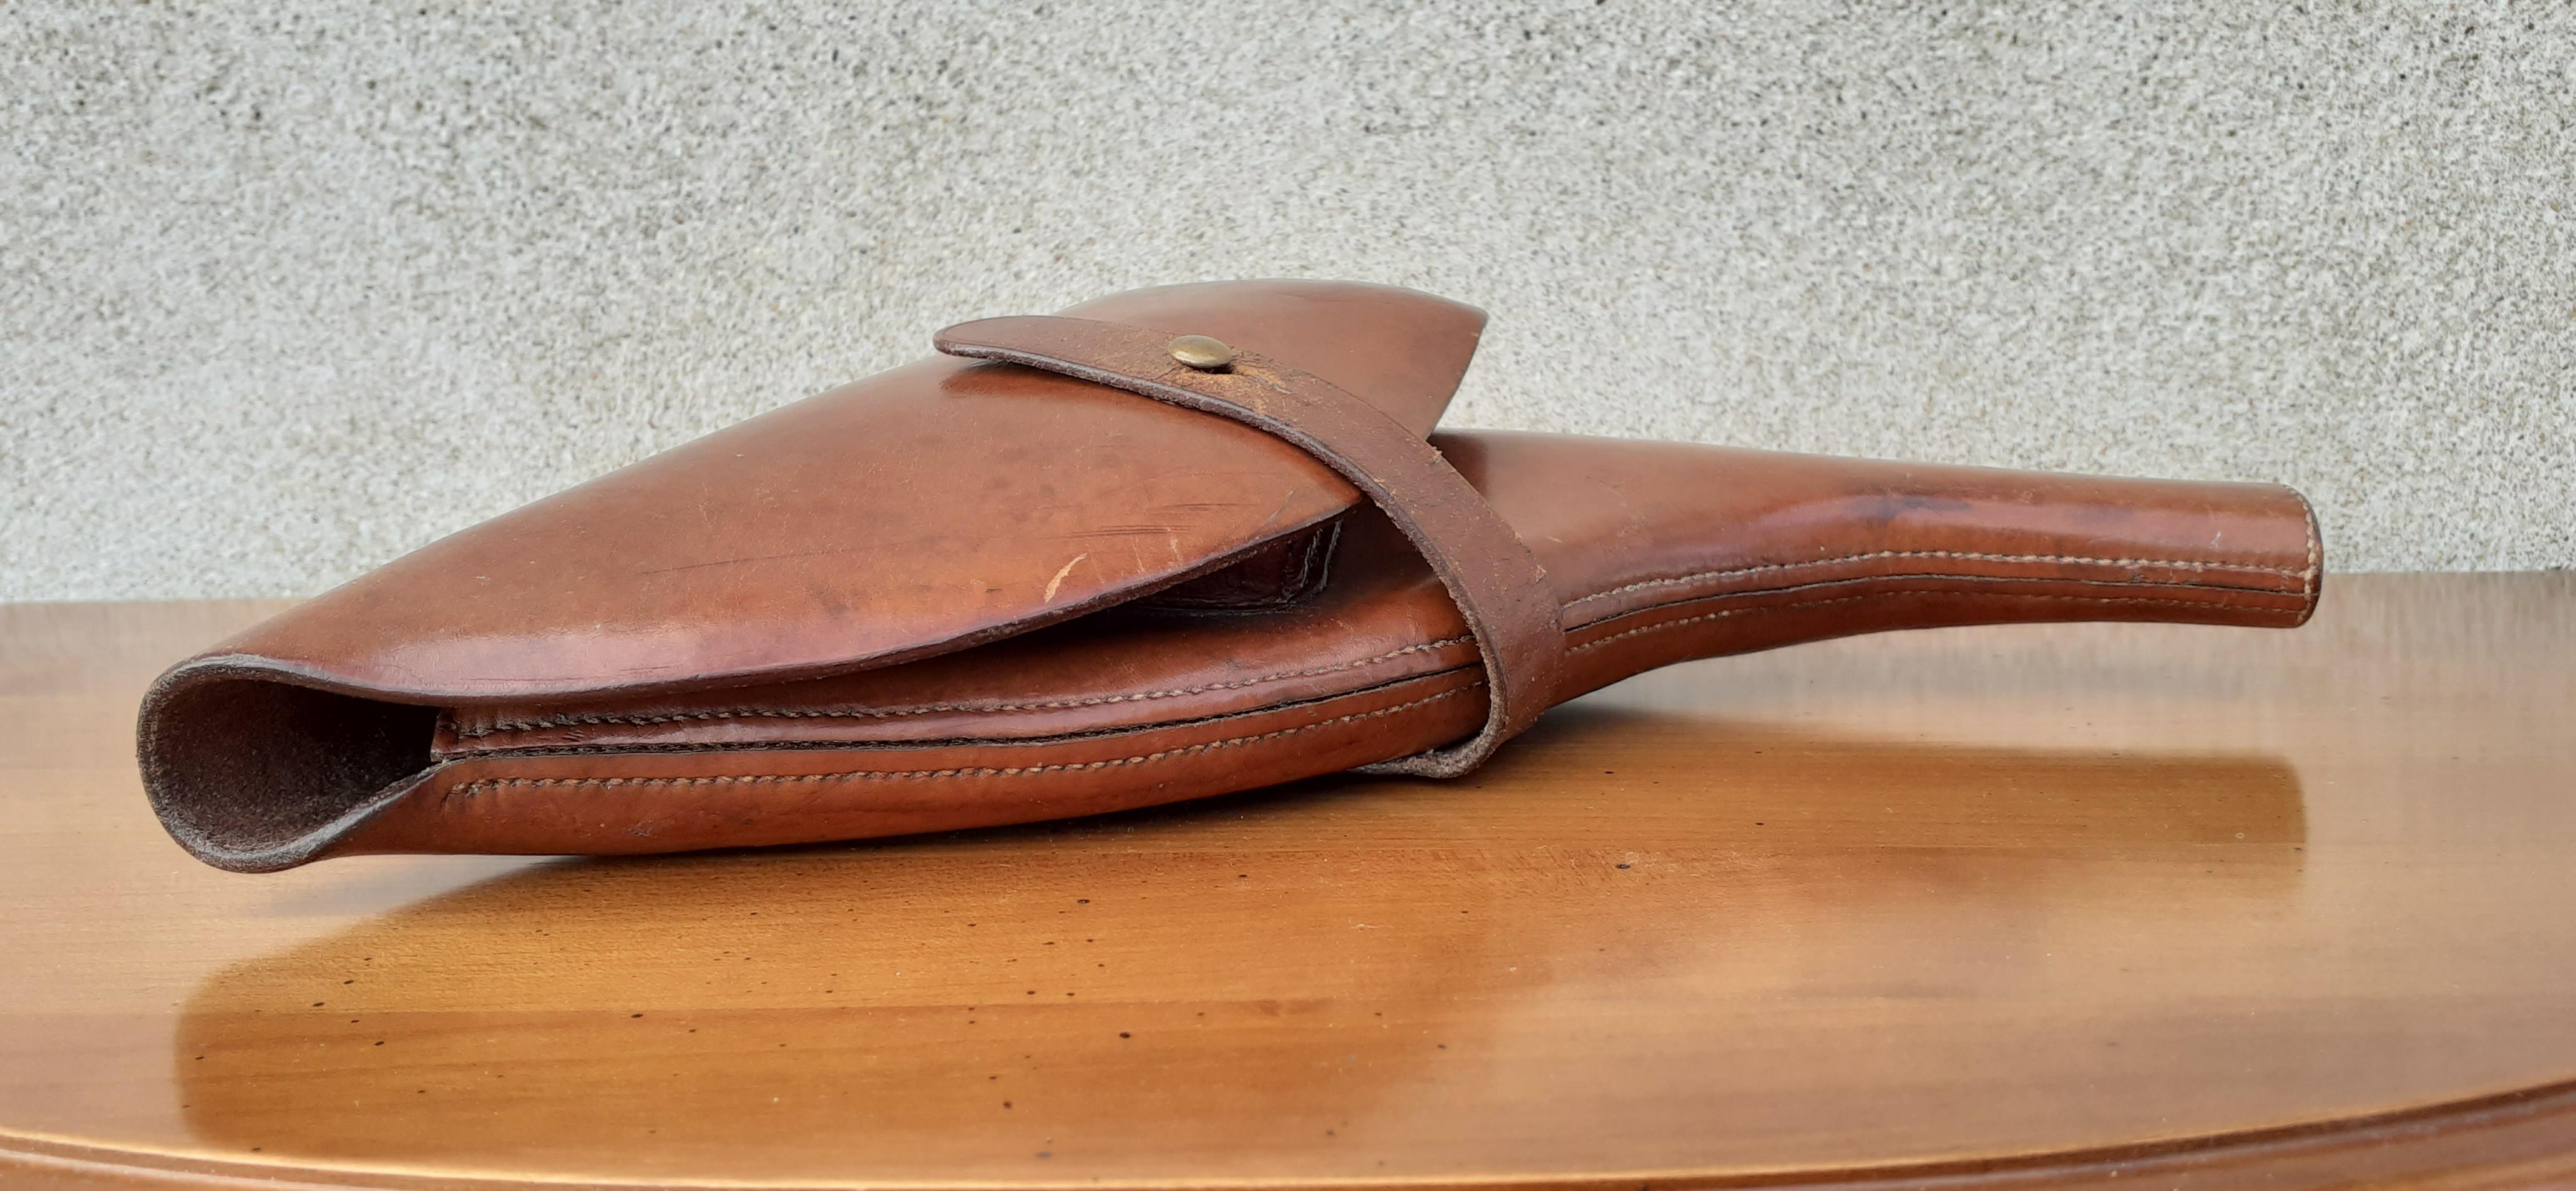 Exceptional Hermès Revolver Holster in Leather High Quality RARE 1